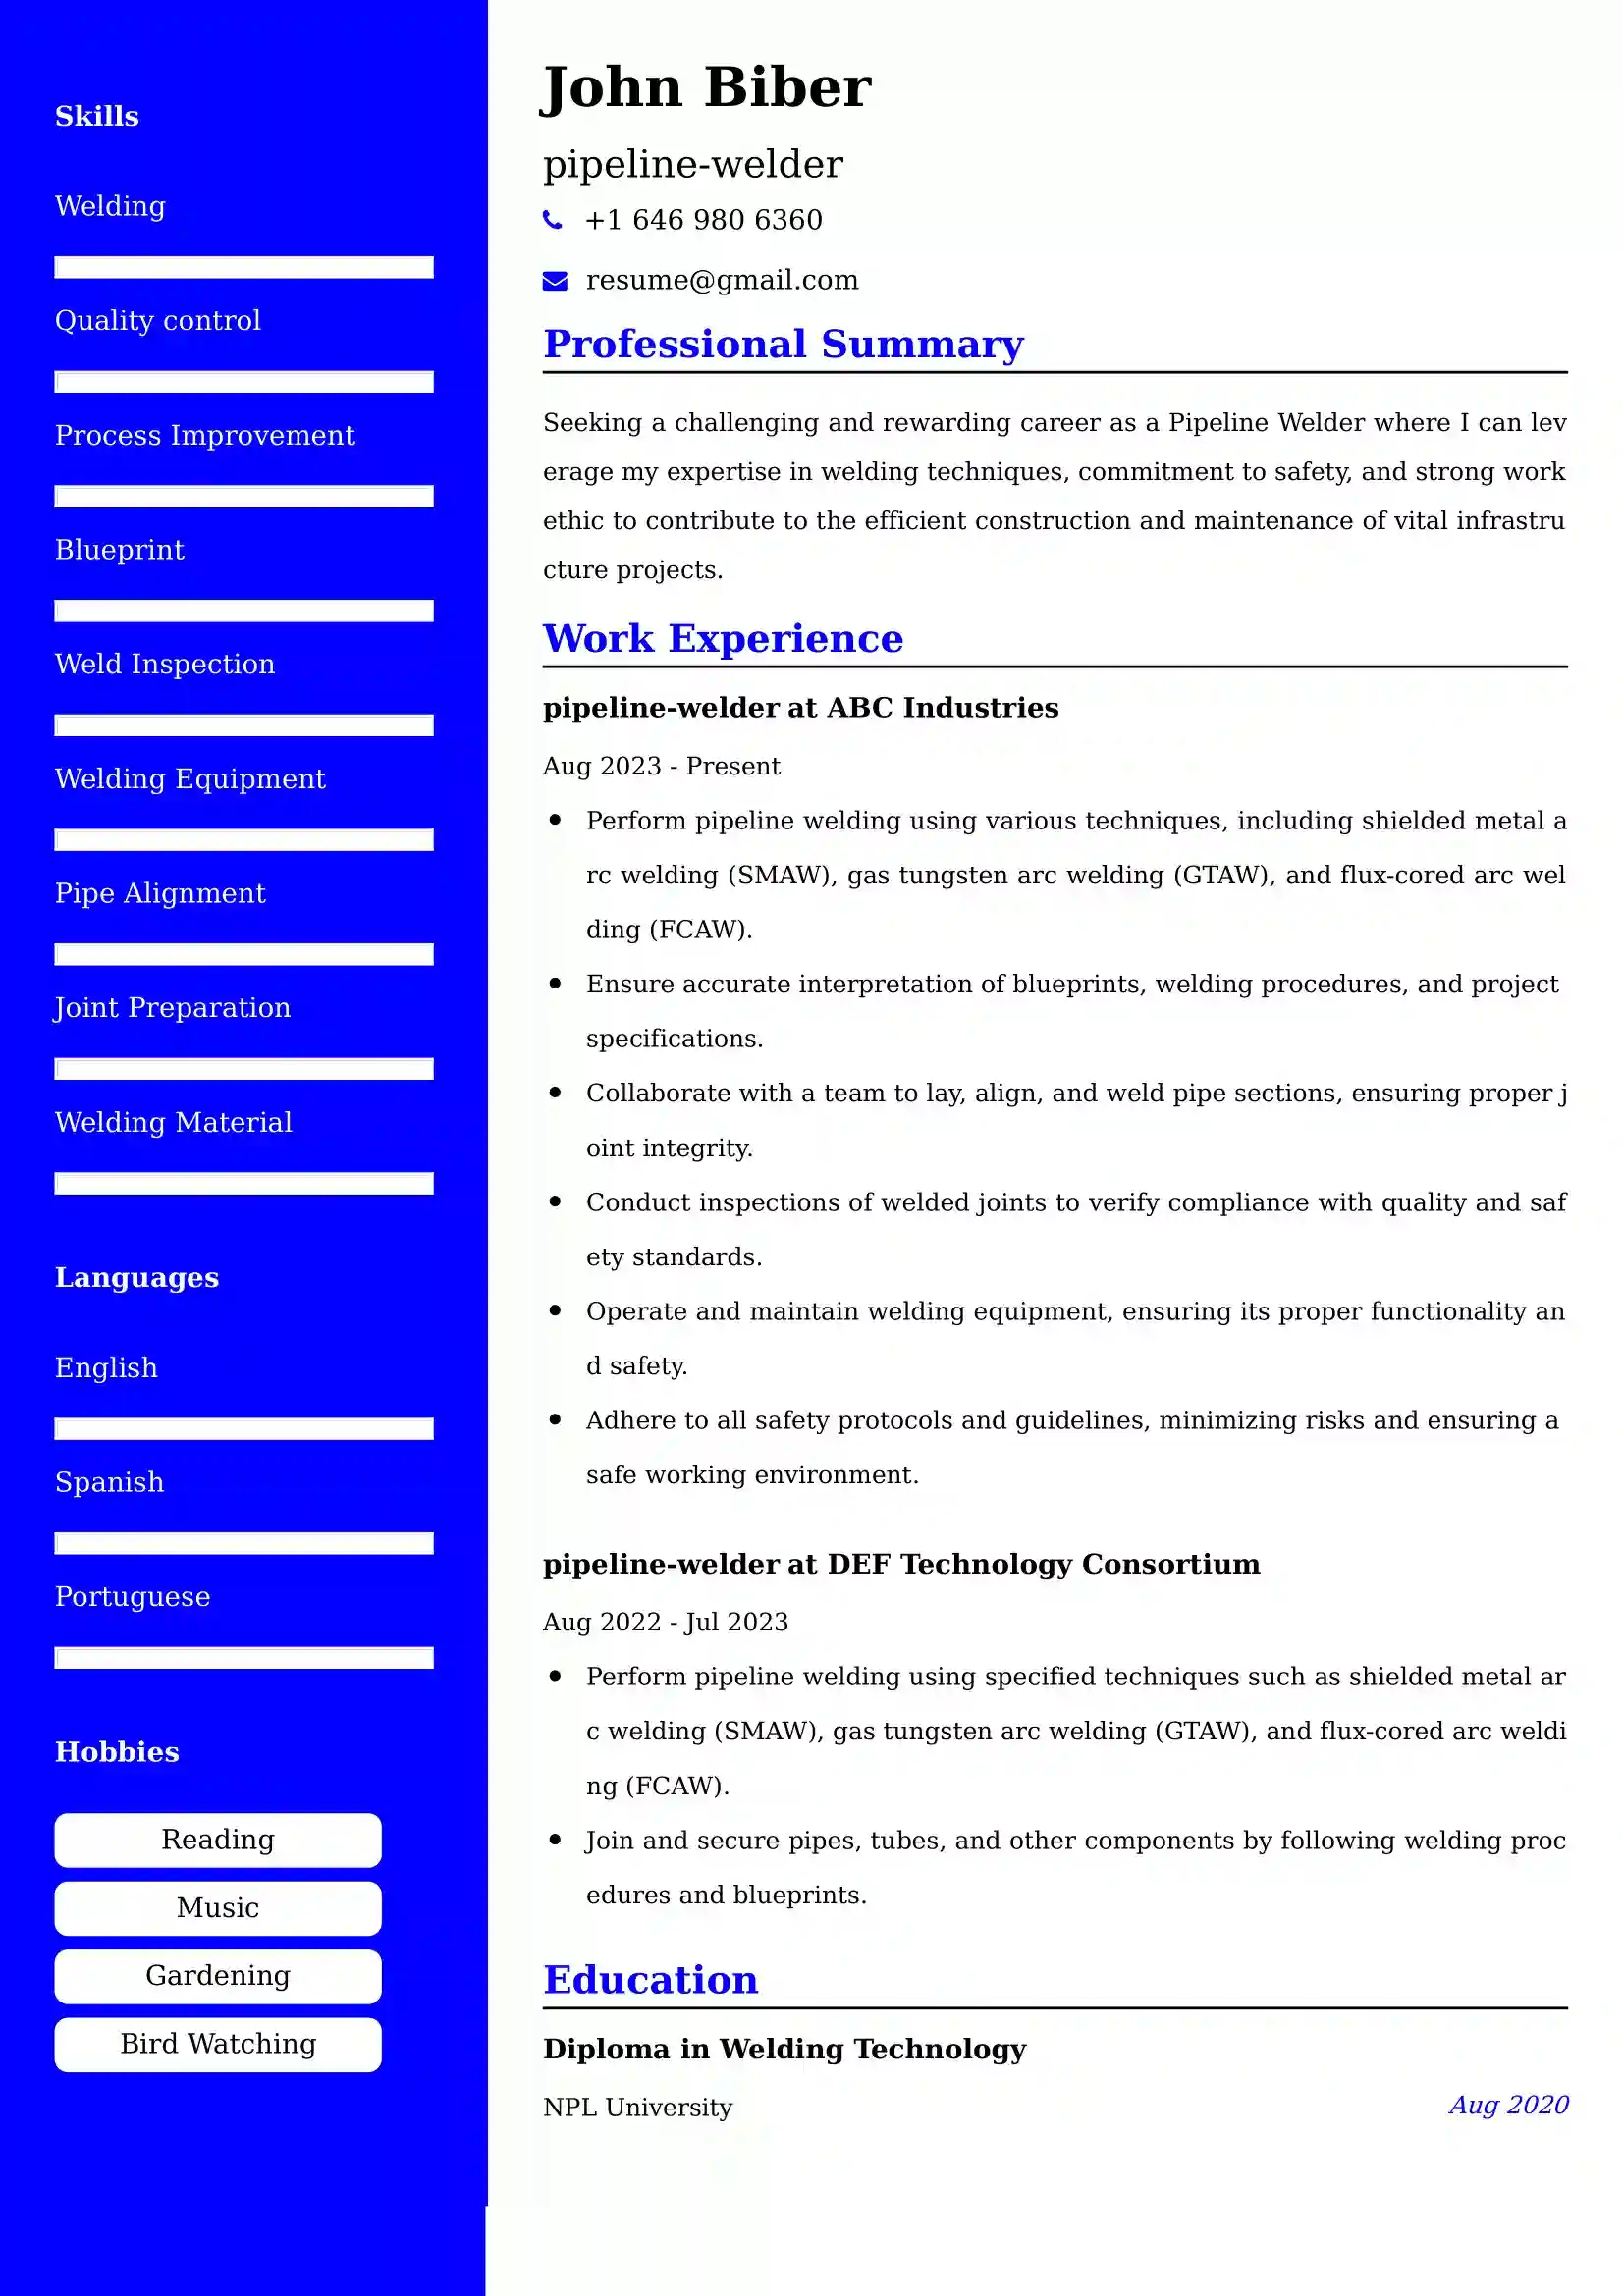 Pipeline Welder Resume Examples for UK Jobs - Tips and Guide